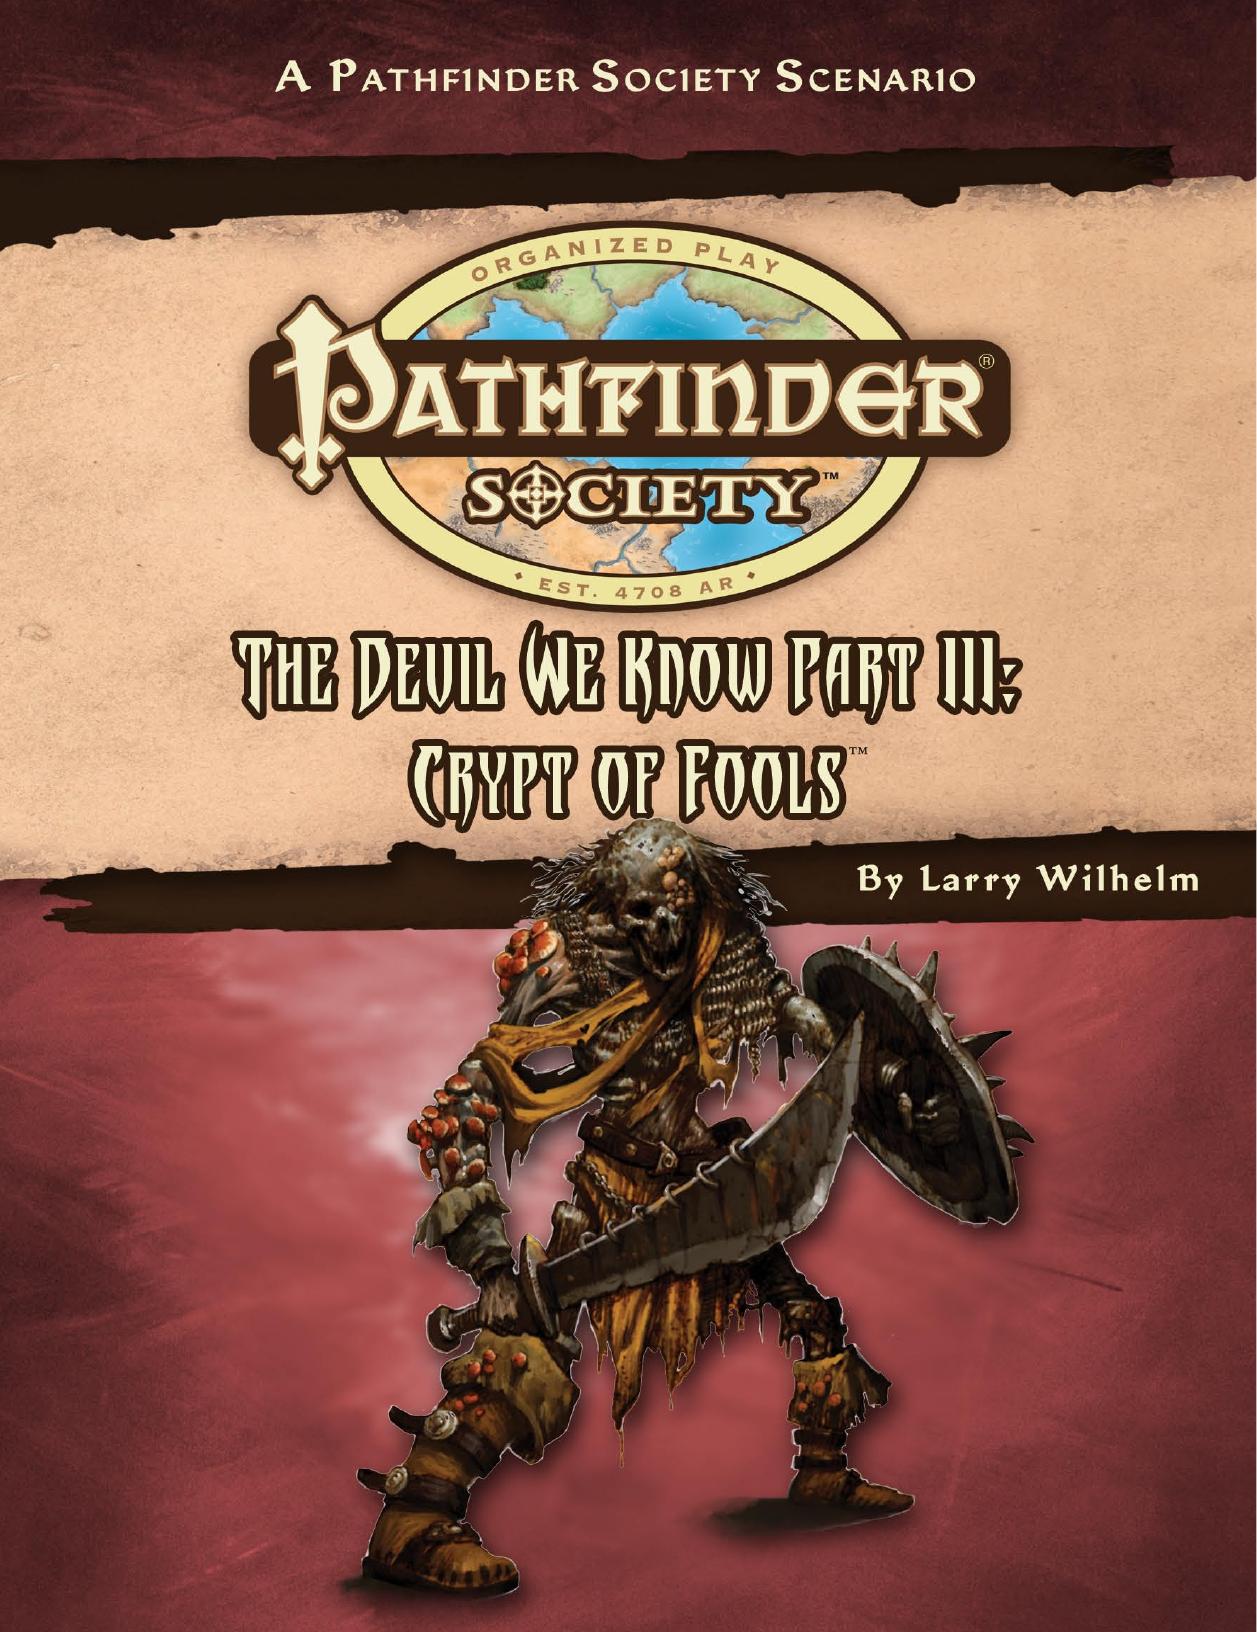 Pathfinder Society: The Devil We Know III: Crypt of fools